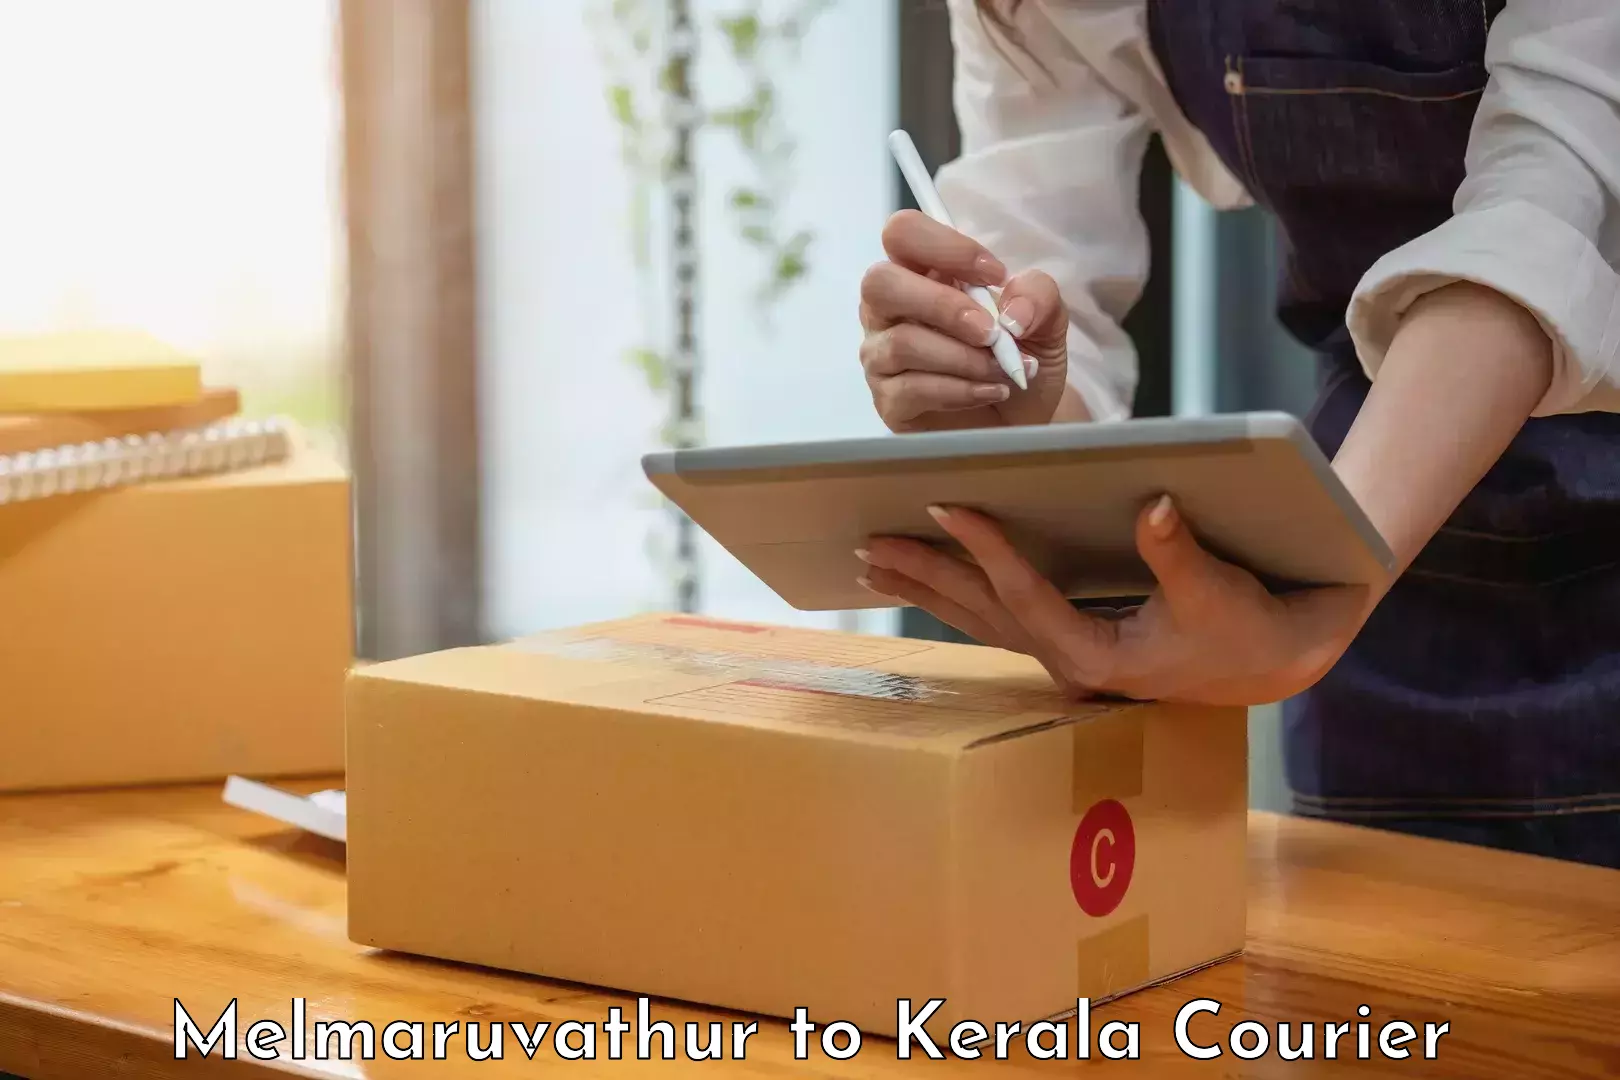 Nationwide delivery network Melmaruvathur to Kerala